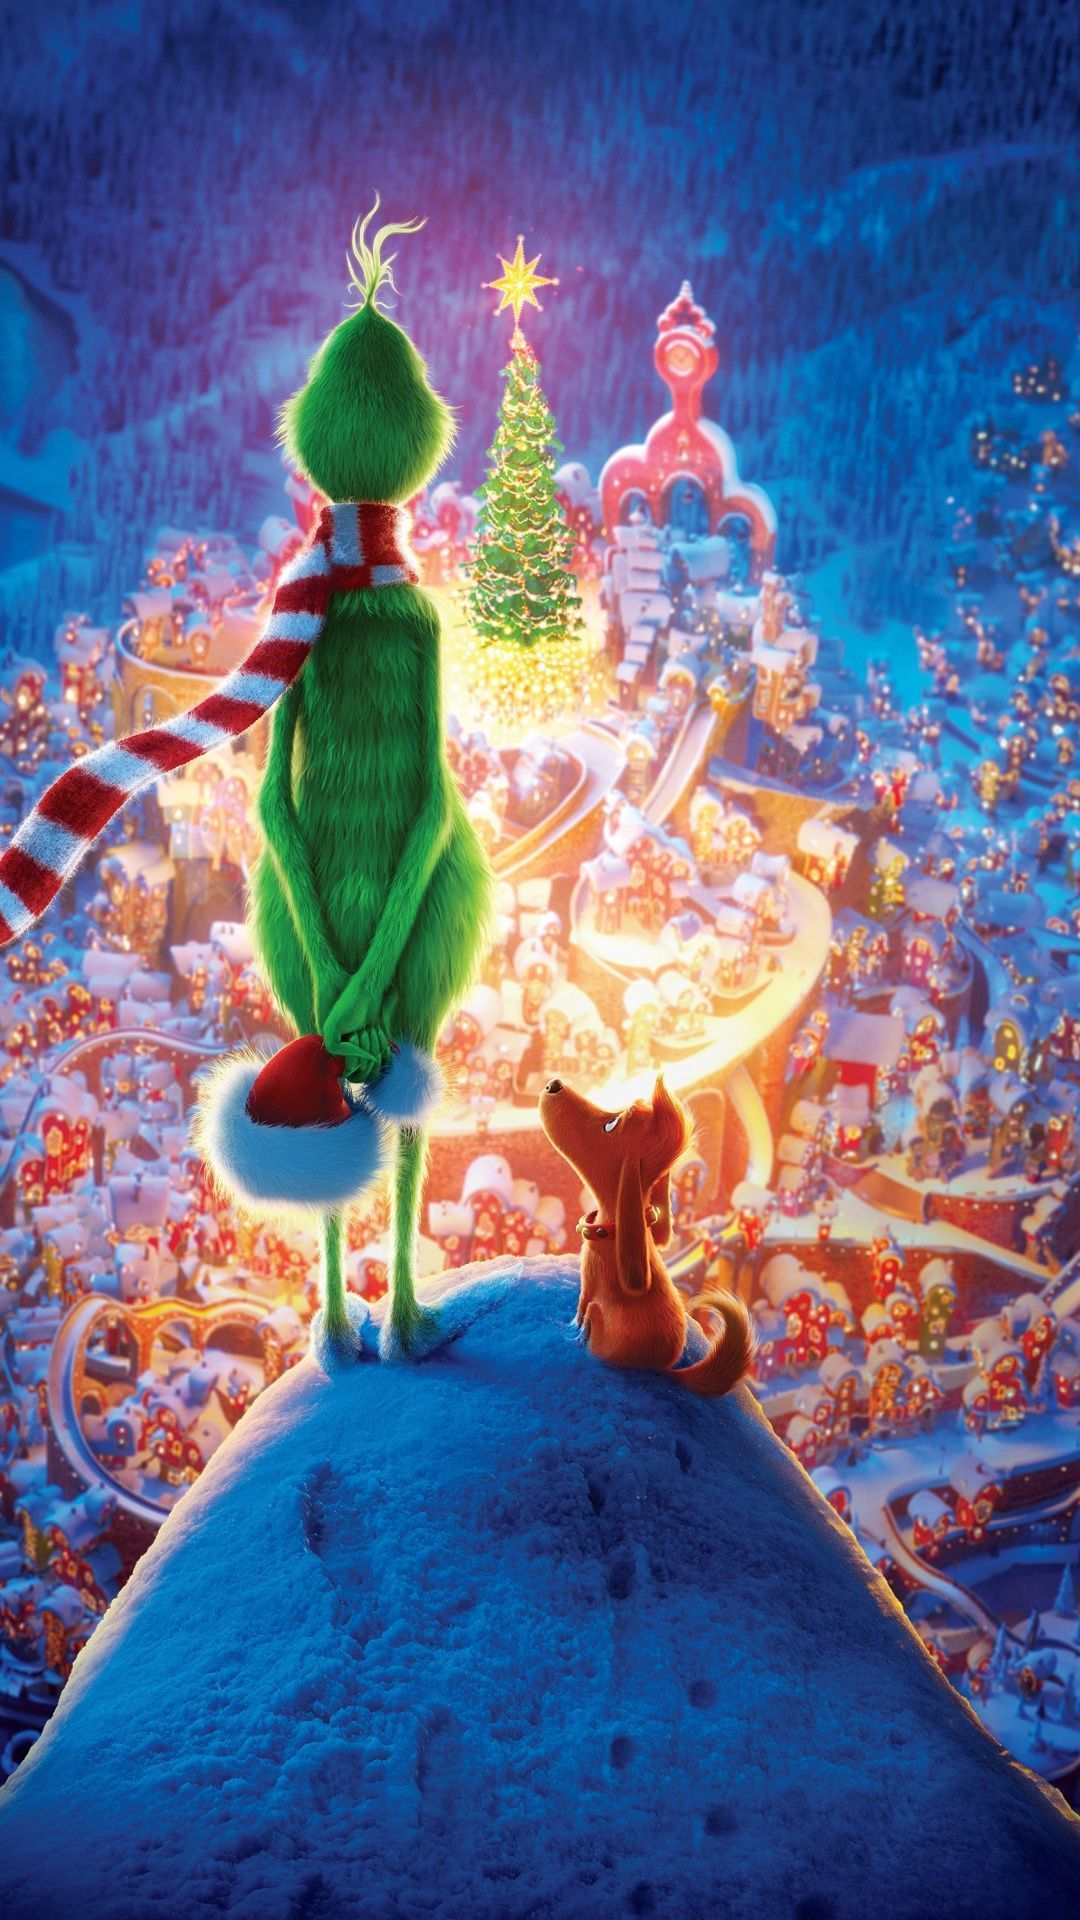 HD wallpaper Movie How the Grinch Stole Christmas  Wallpaper Flare